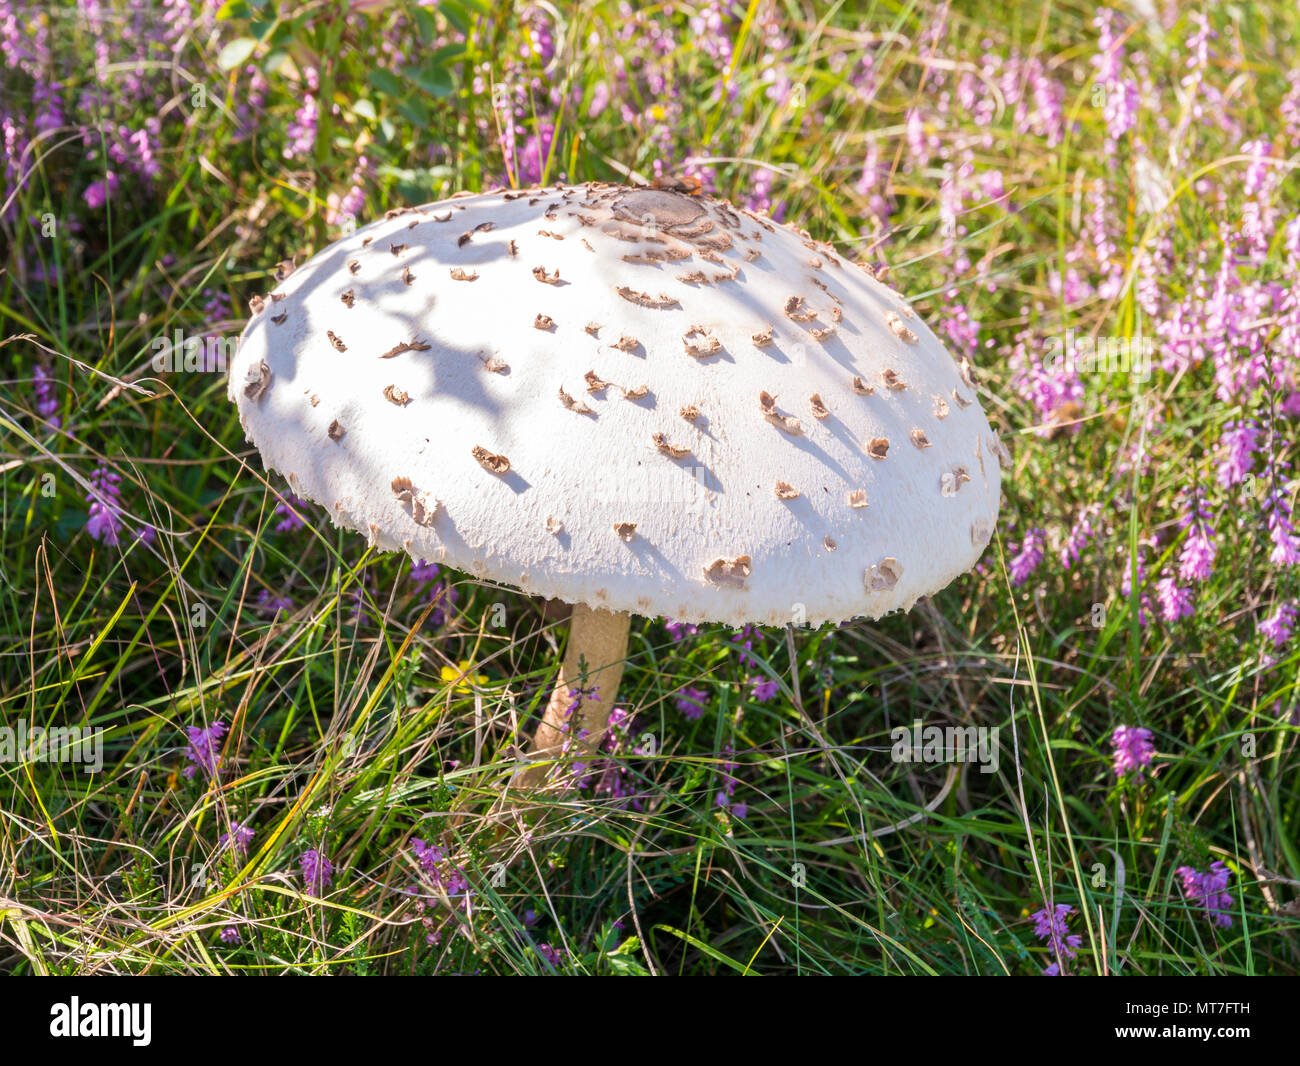 Fruiting body of mature parasol mushroom, Macrolepiota procera, with convex cap between purple heather, grass and shrub in August, Netherlands Stock Photo